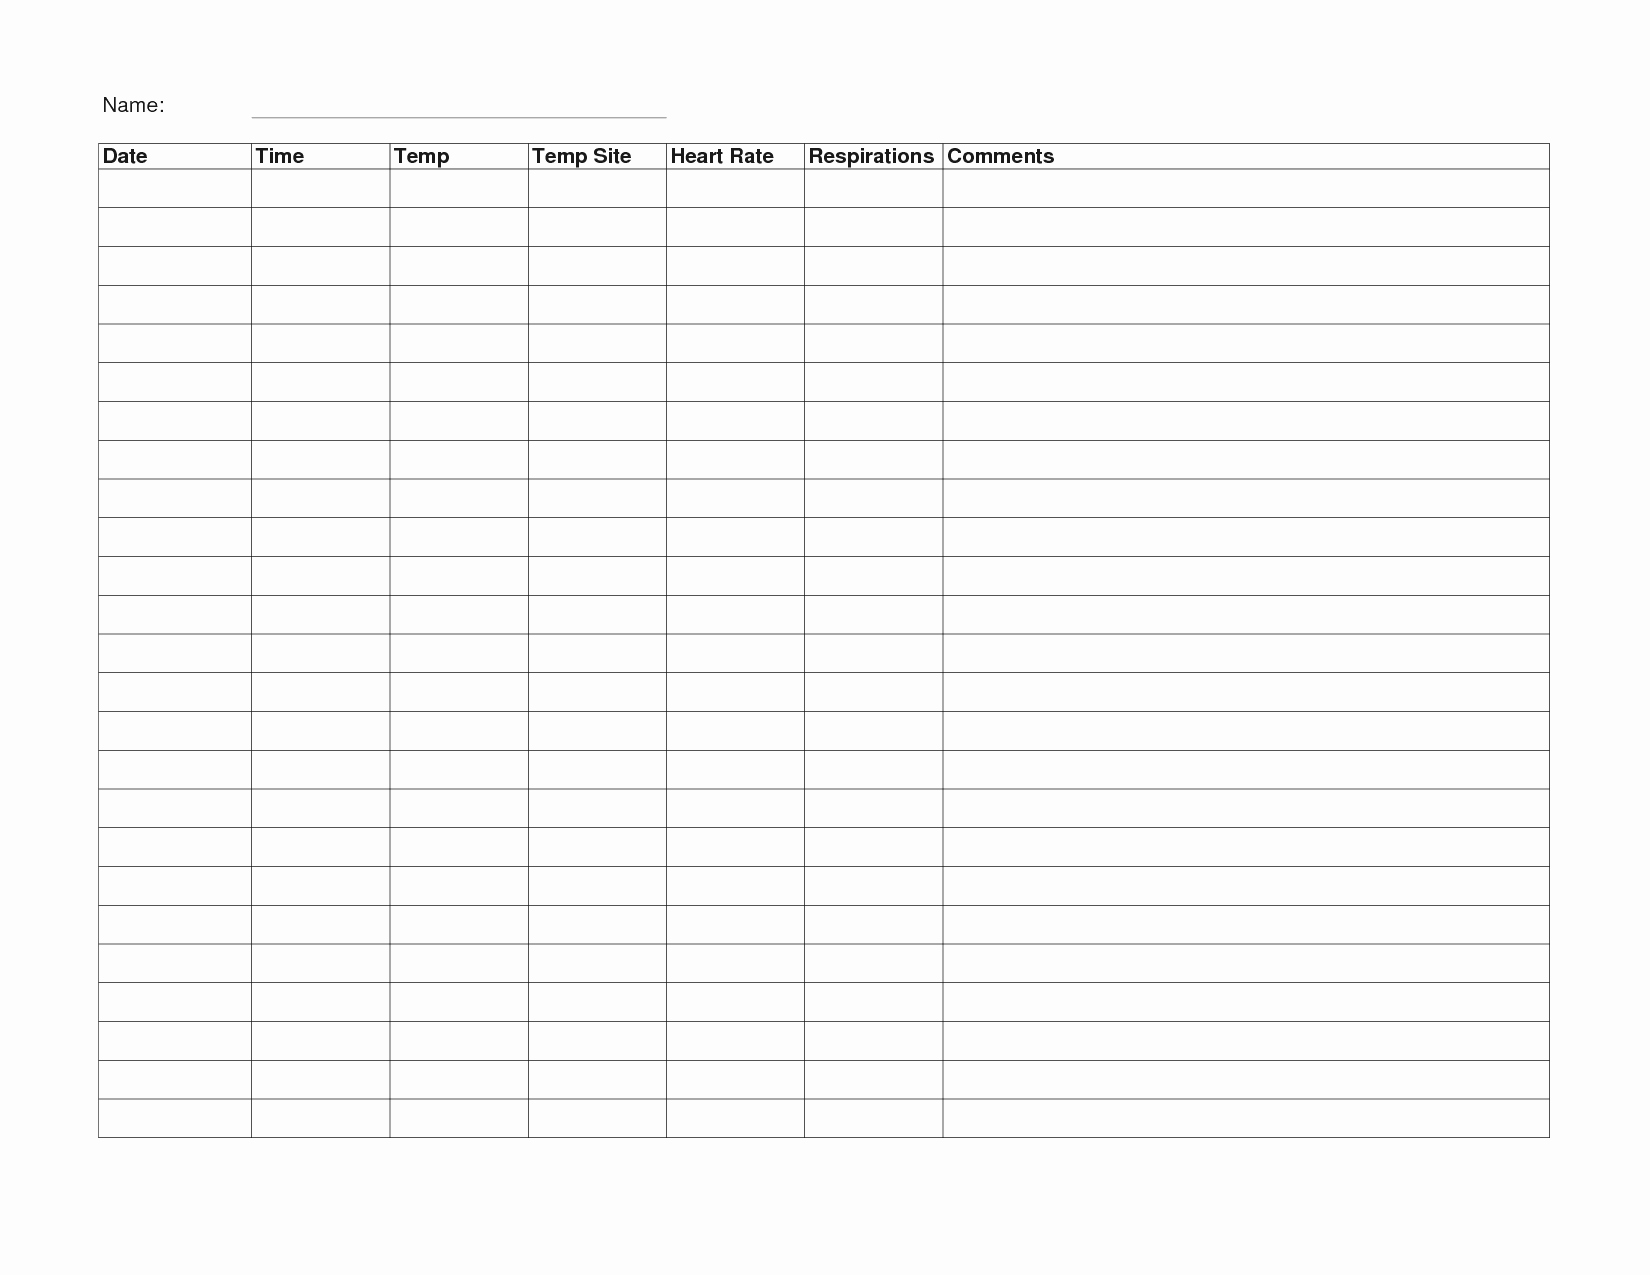 Blank Sign Up Sheet Template Best Of Blank Sign Up Sheet Example Mughals